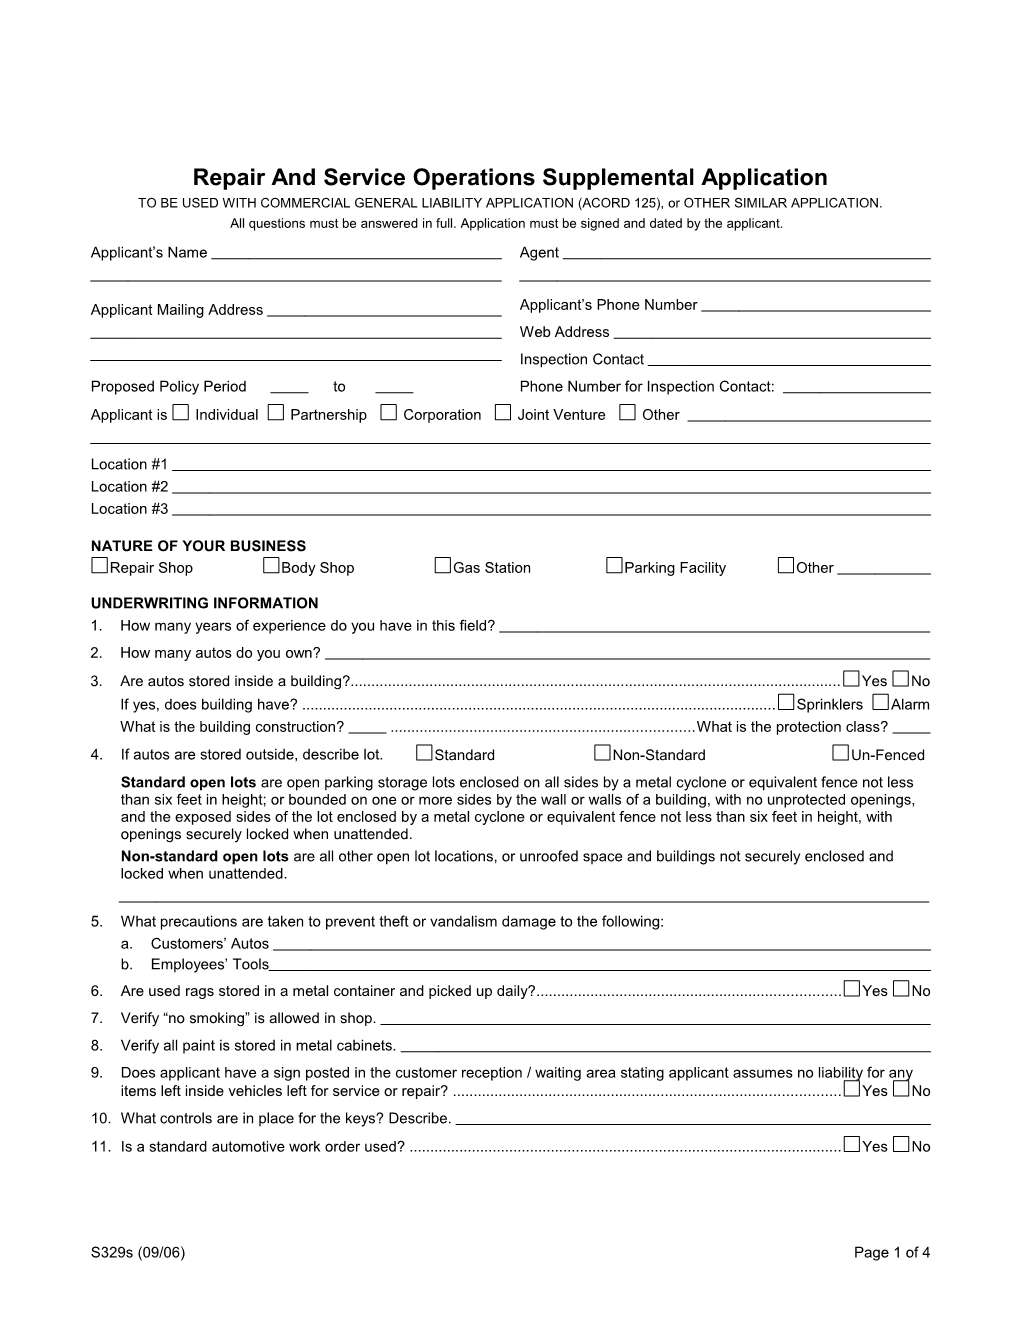 Repair and Service Operations Supplemental Application